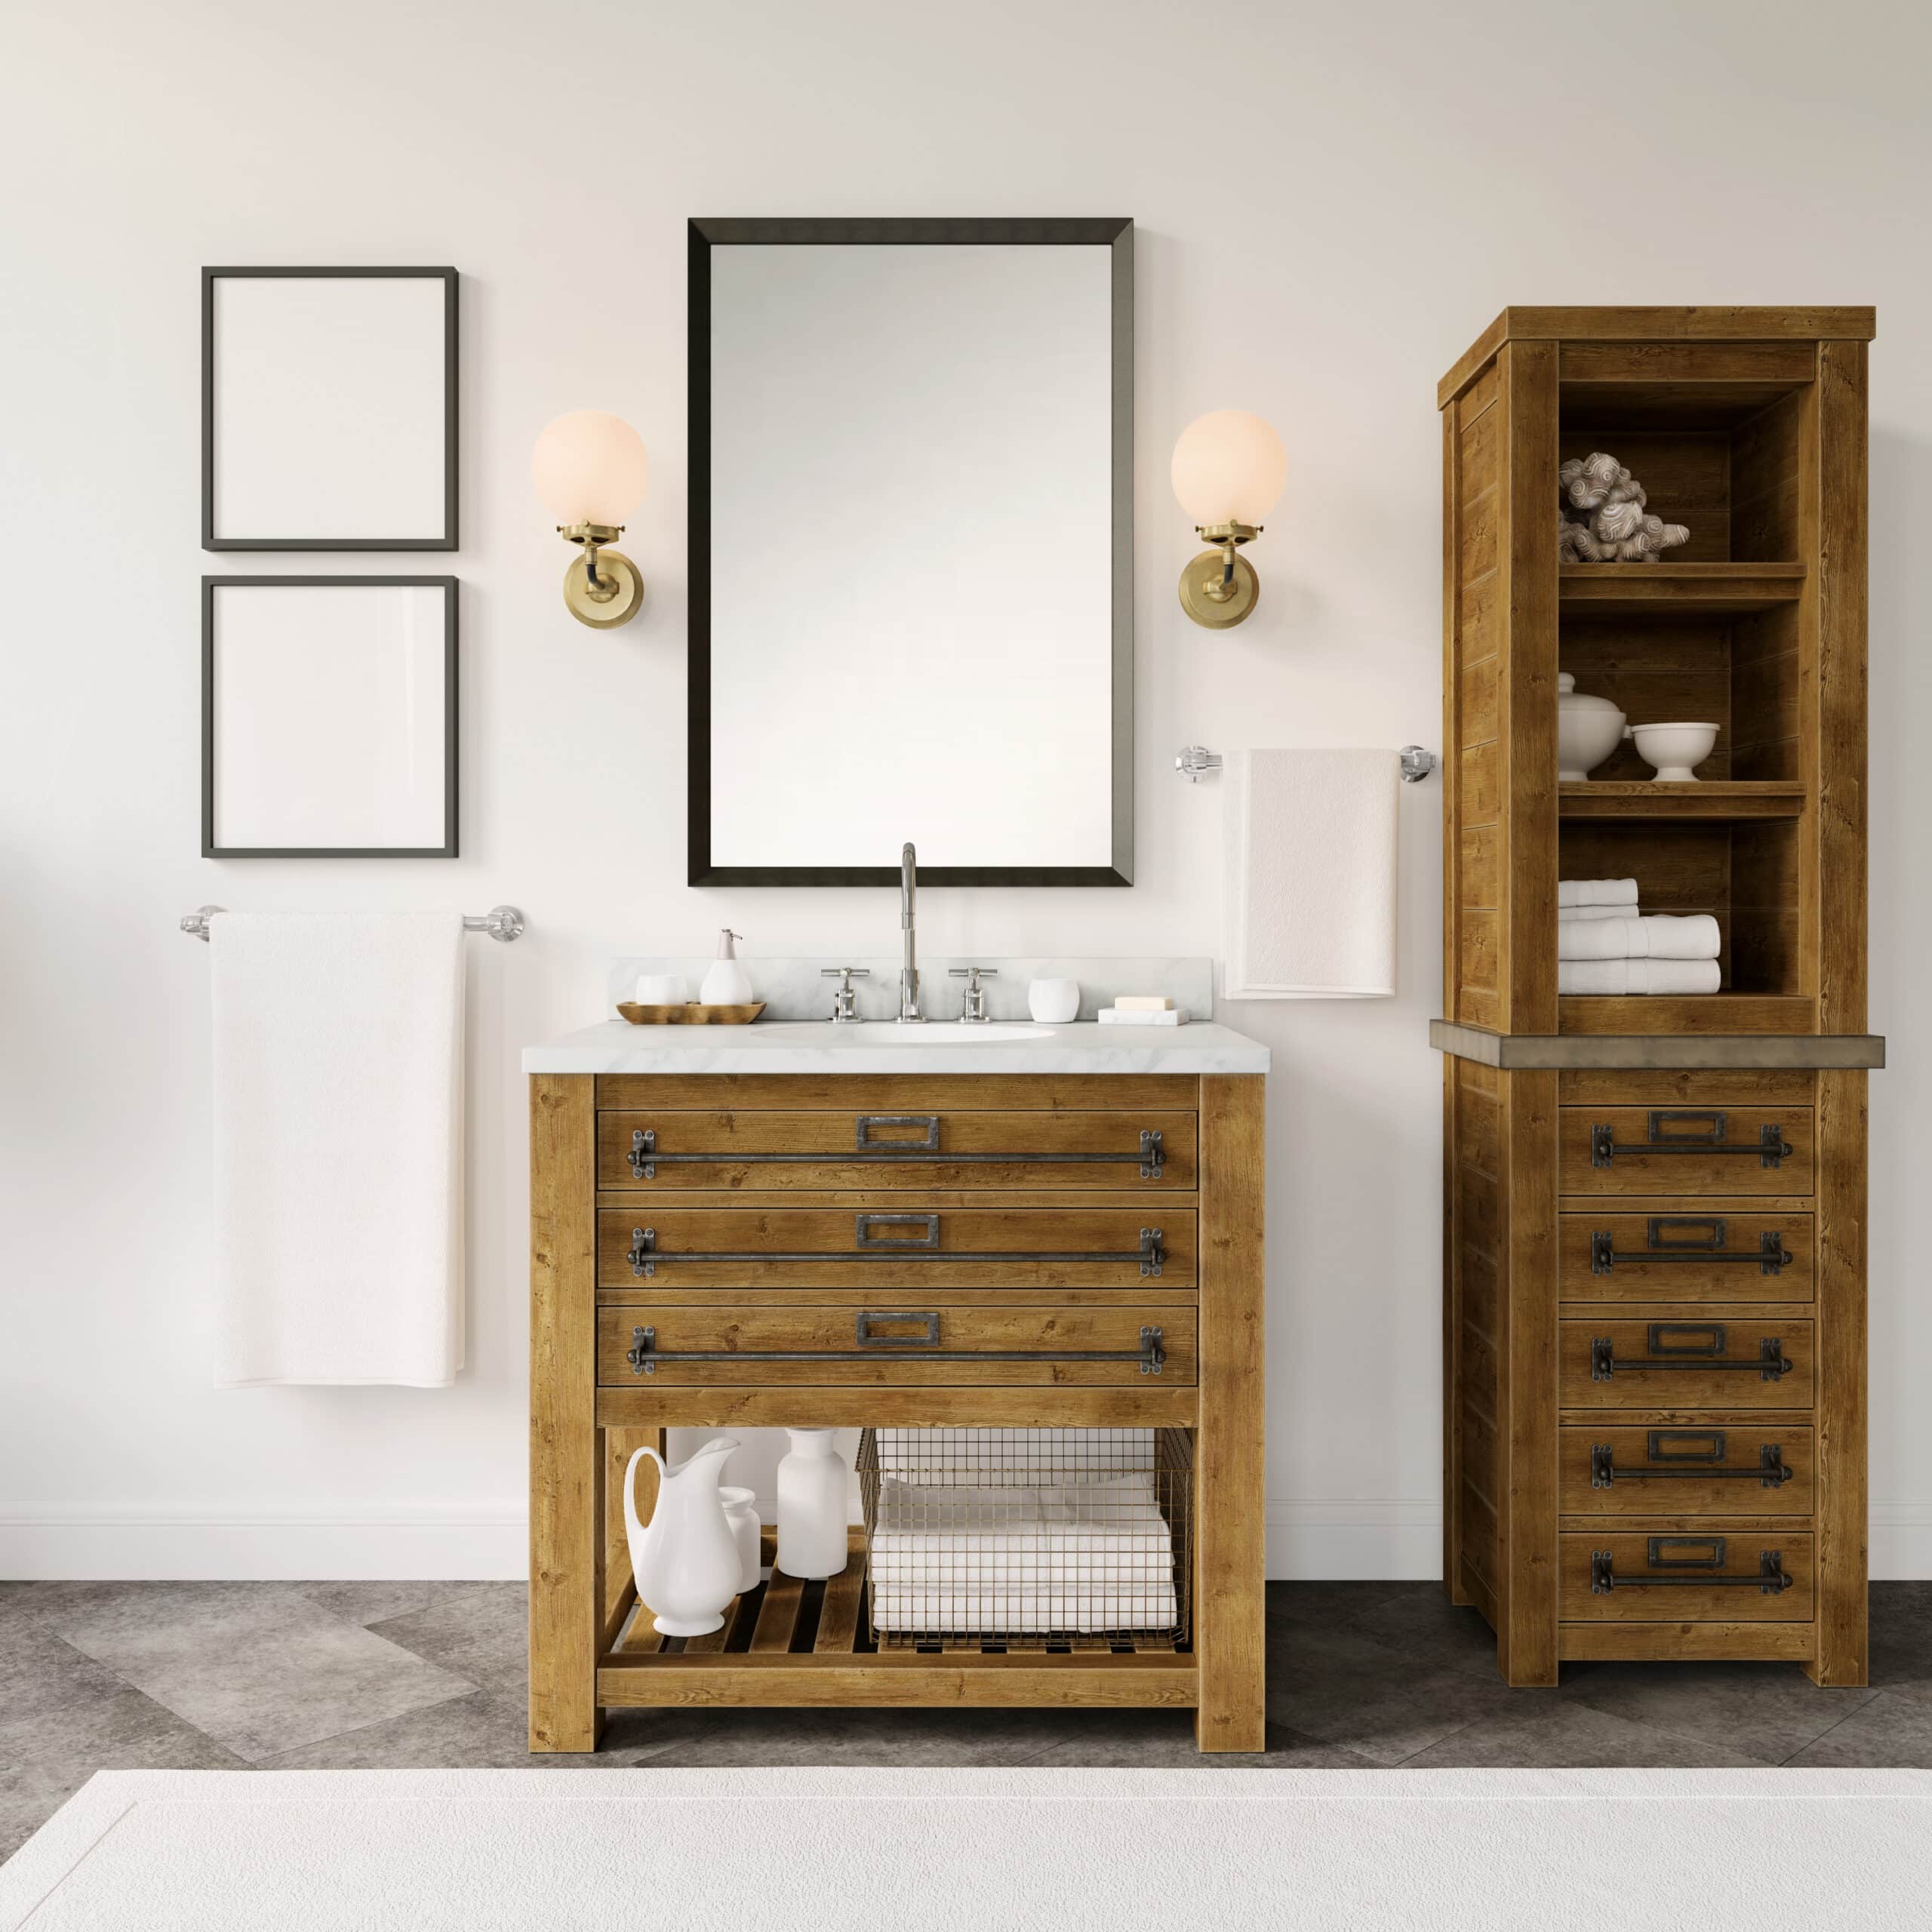 wooden cabinets for bathroom